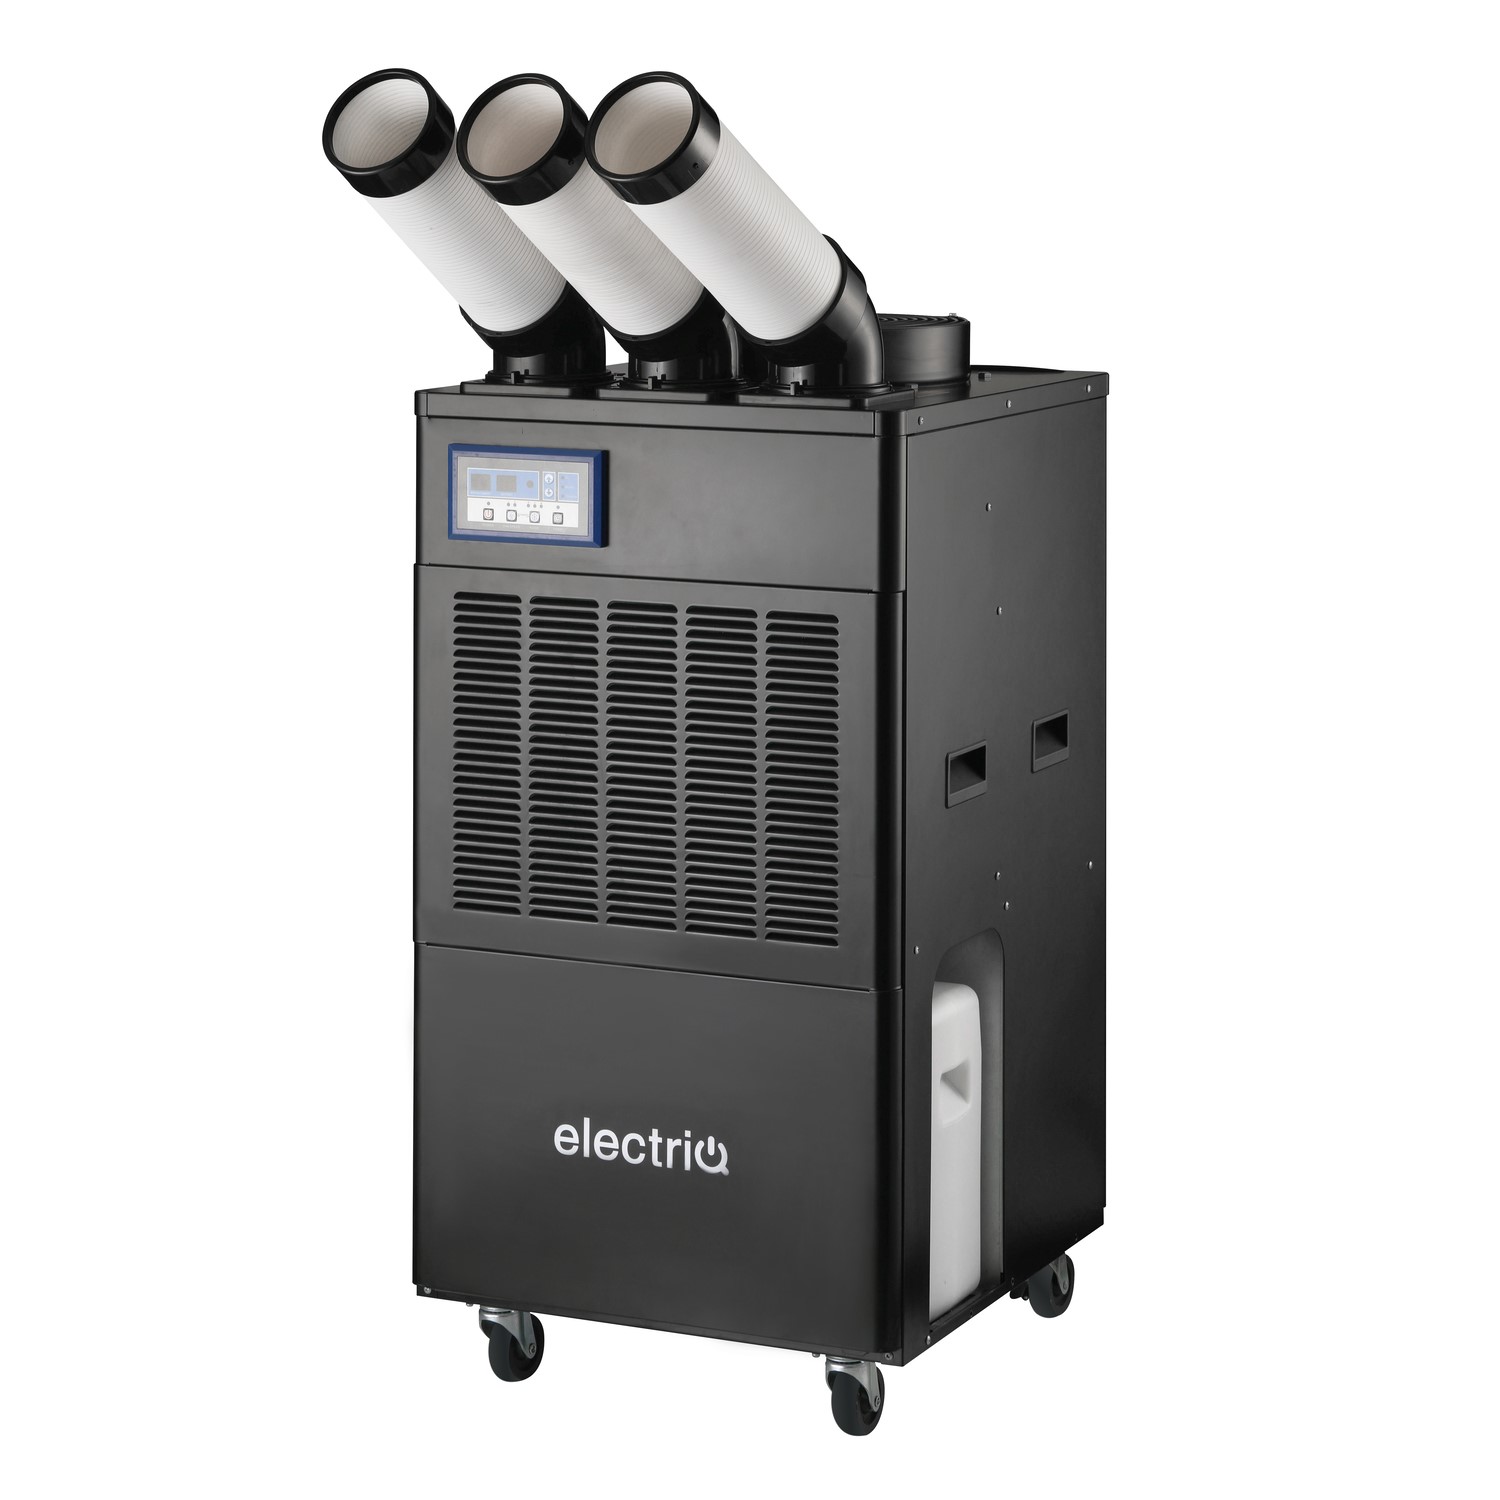 Refurbished electriQ 18000 BTU Portable Commercial Air Conditioner for up to 45 sqm areas Heavy Duty